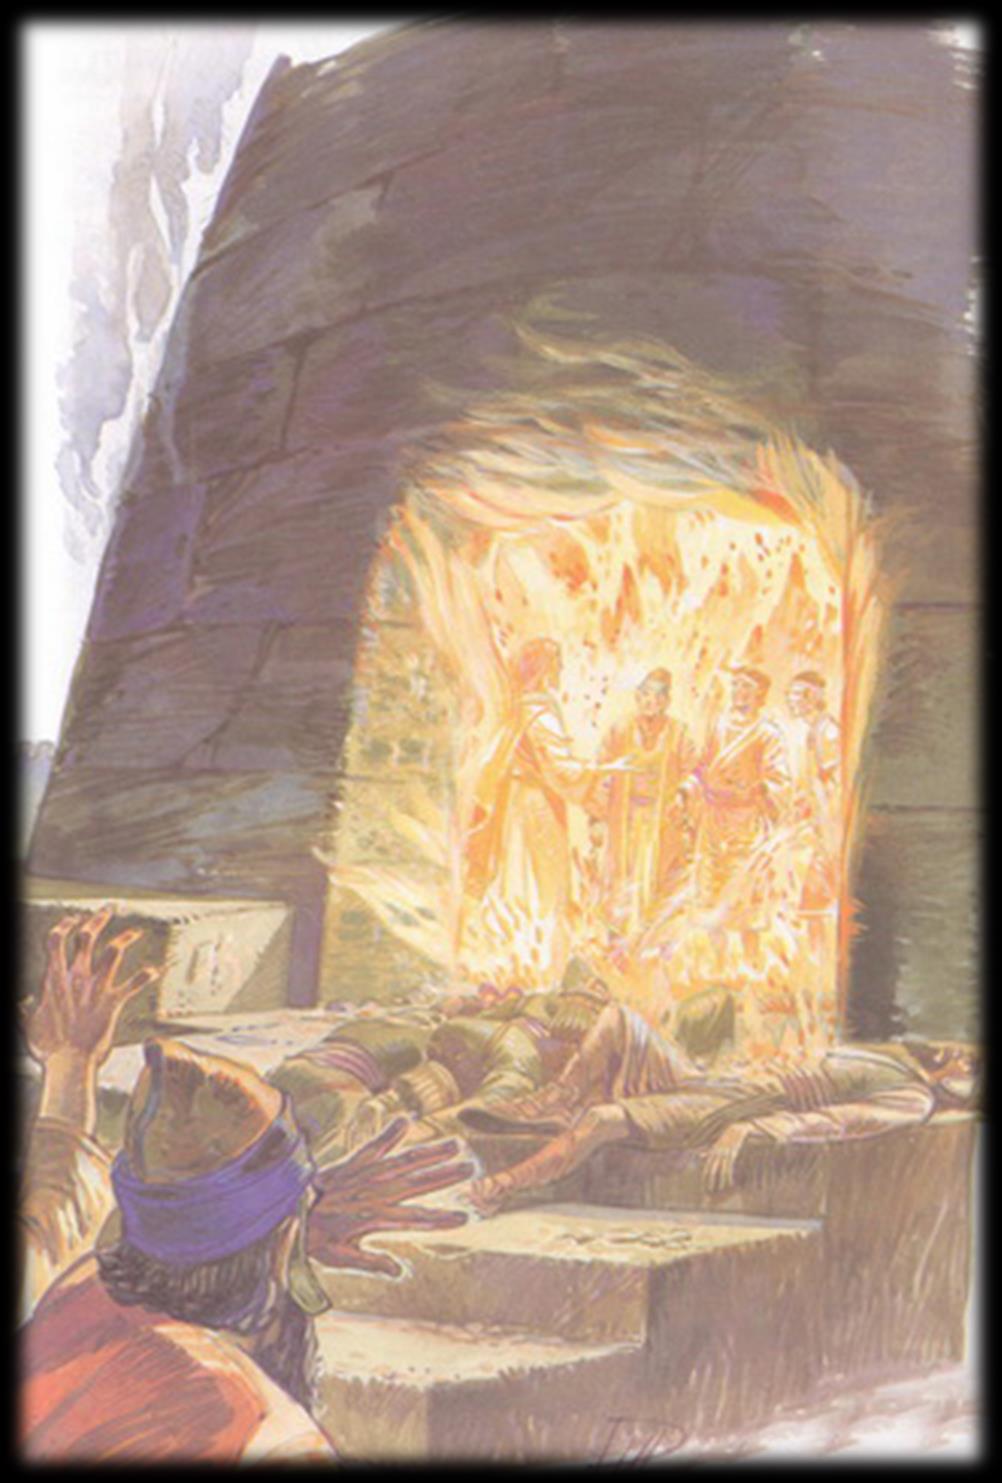 The furnace had an opening at the top into which Shadrach, Meshach,